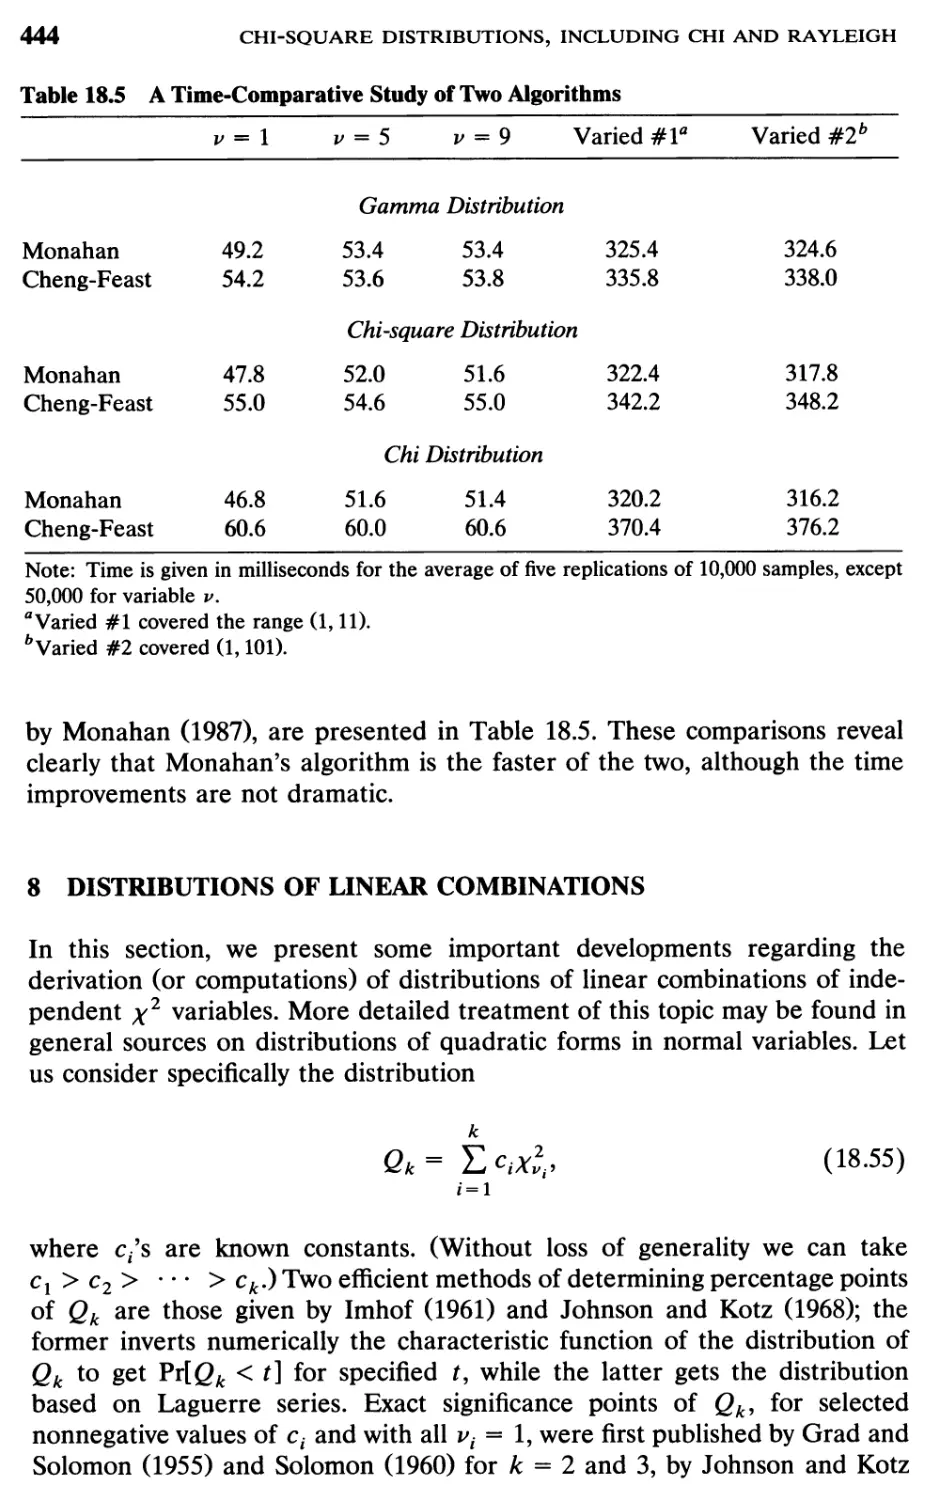 TABLE 18.5 A time-comparative study of two algorithms	444
8 Distributions of Linear Combinations, 444